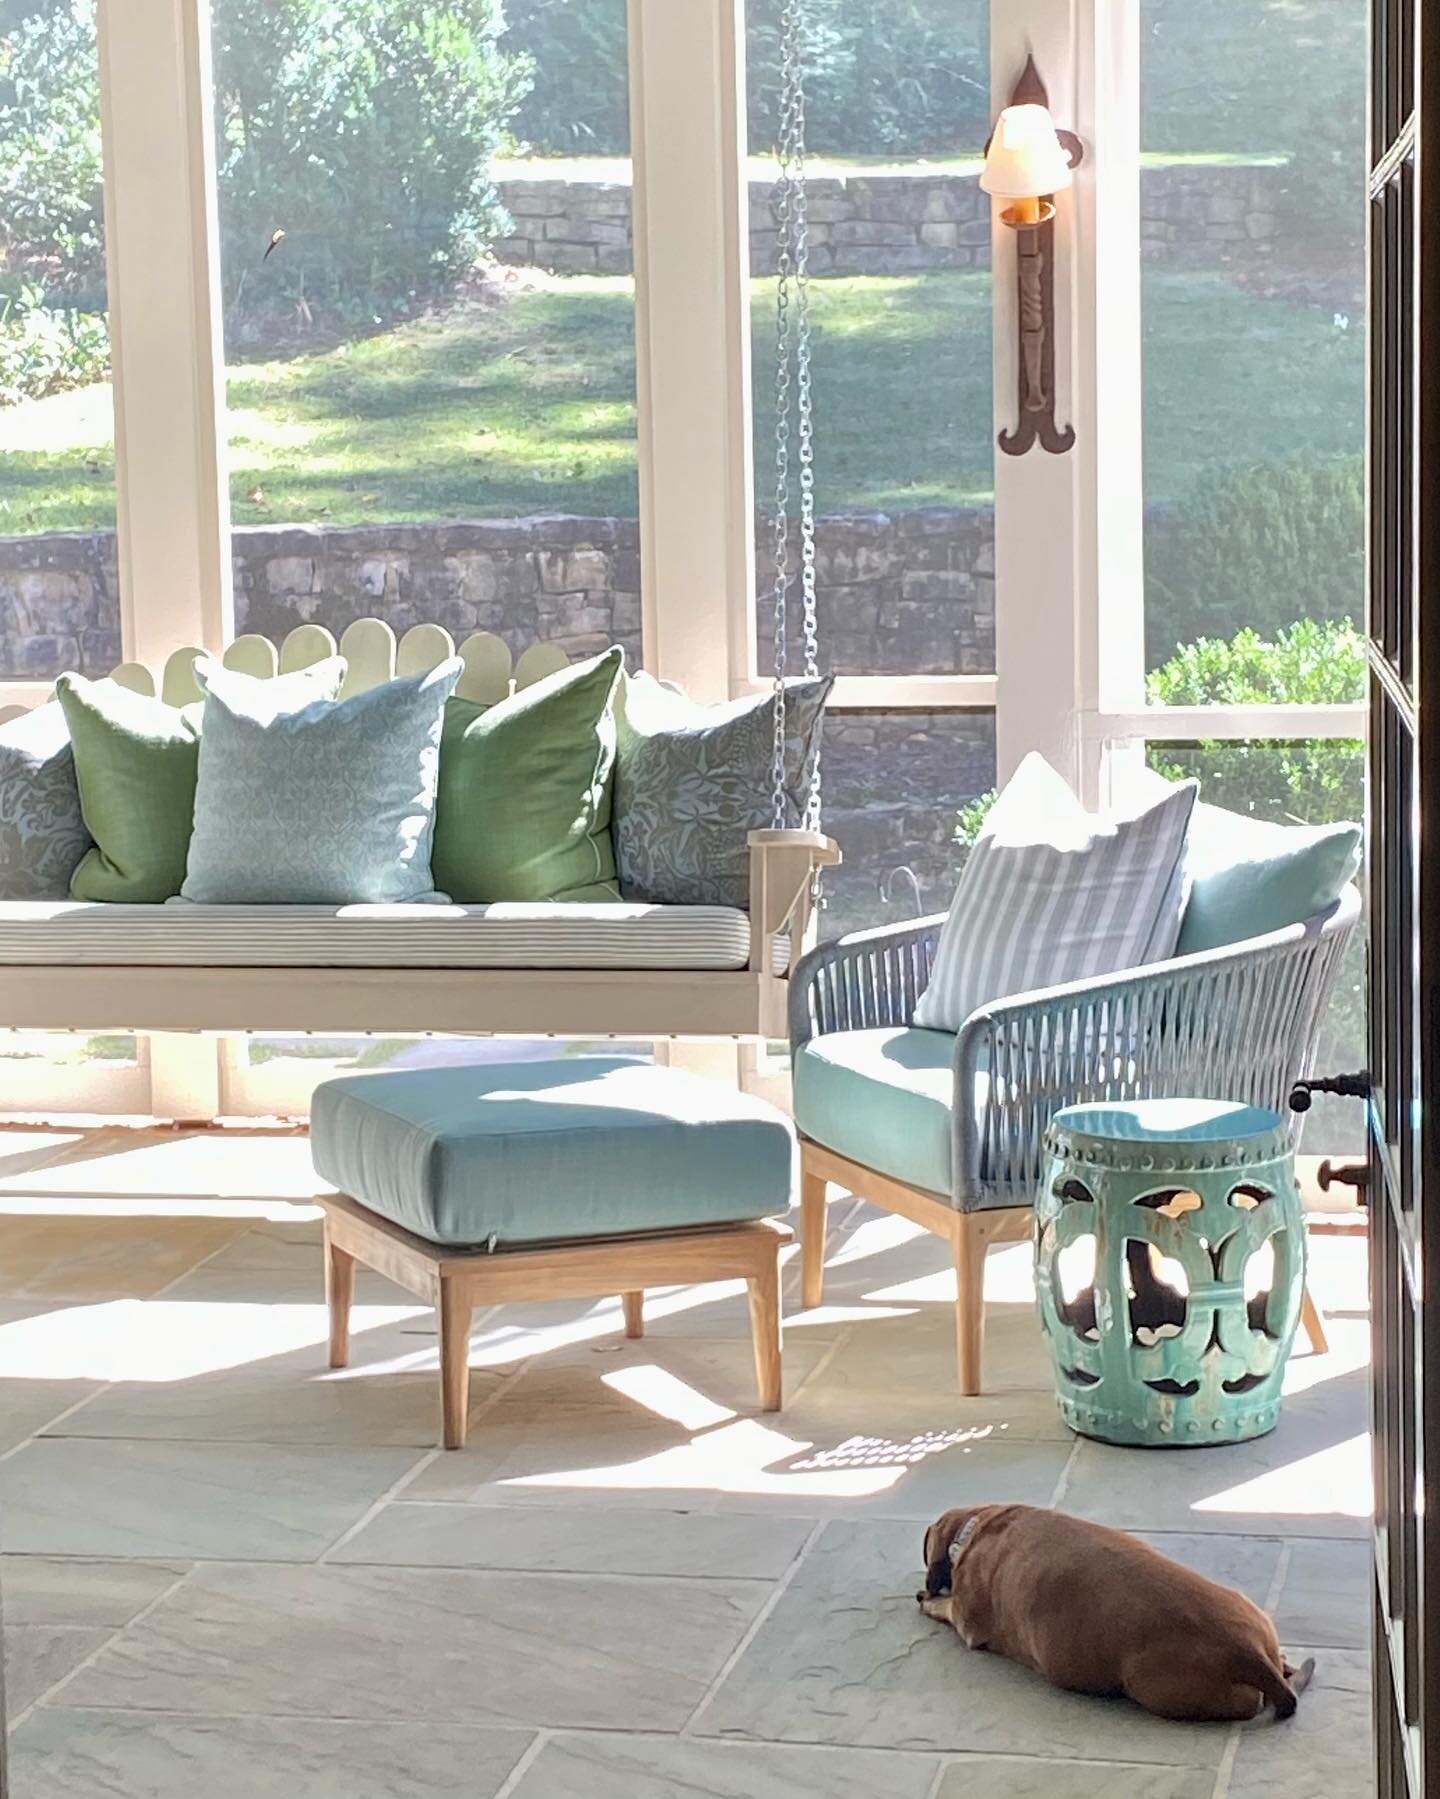 Screened porch furniture finally arrives after many months of waiting! 
Finally our client gets to relax and 
enjoy this beautiful weather. ☀️🐶🍸

#outdoorliving #outdoorfurniture #screenedporch #interiordesign #happyclient